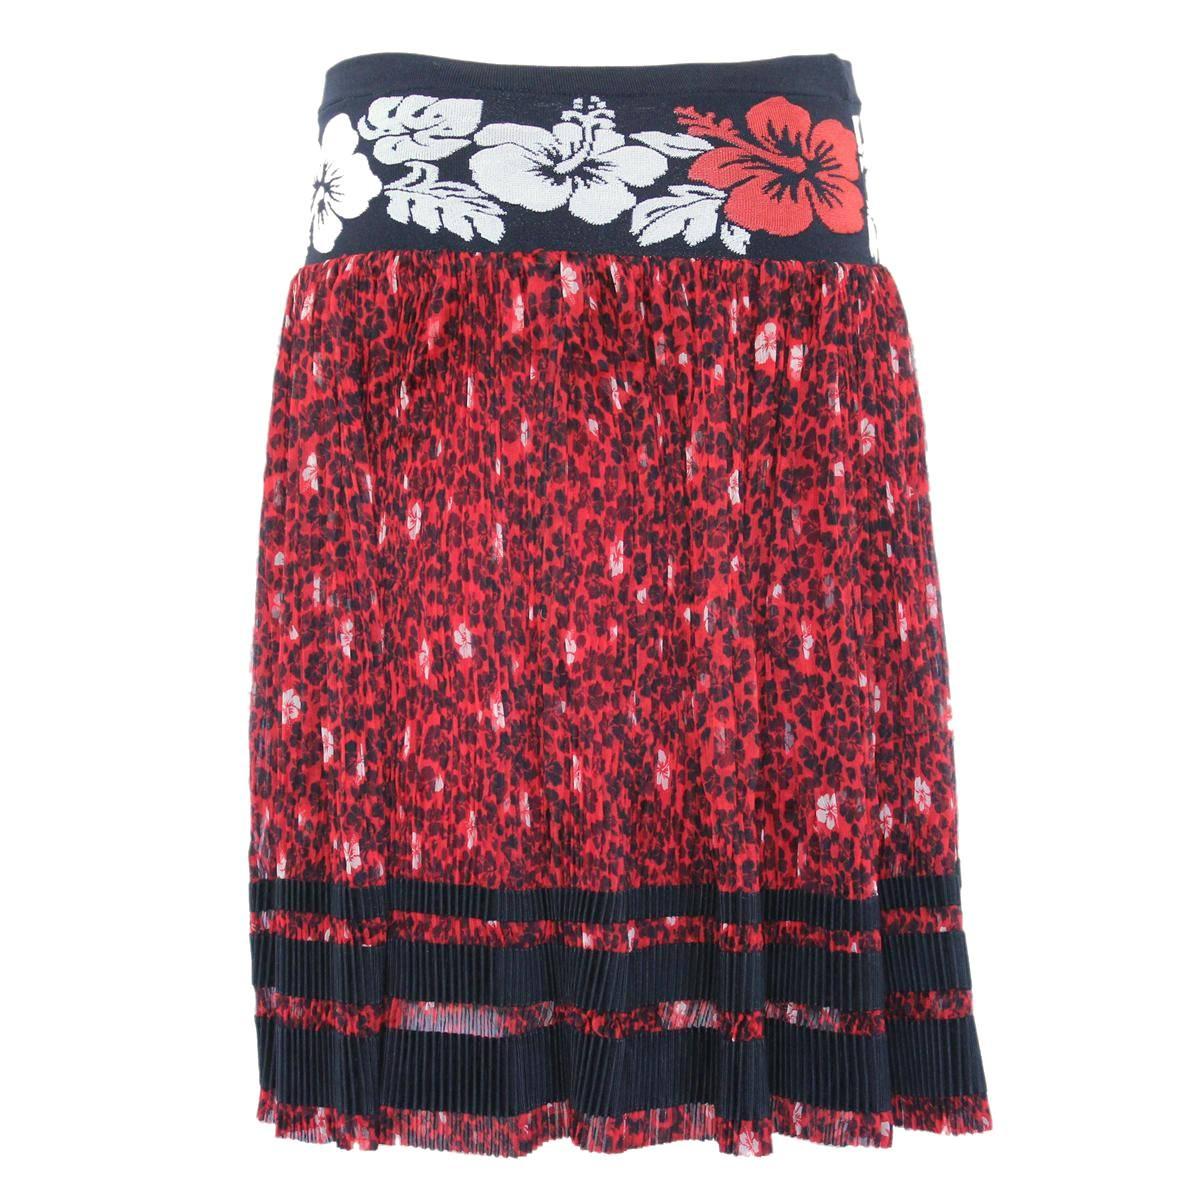 Beautiful Gaultier skirt
Silk (90%) and viscose
Floral theme
Red and black print
Plissé
Total length cm 58 (22.8 inches)
Worldwide express shipping included in the price !